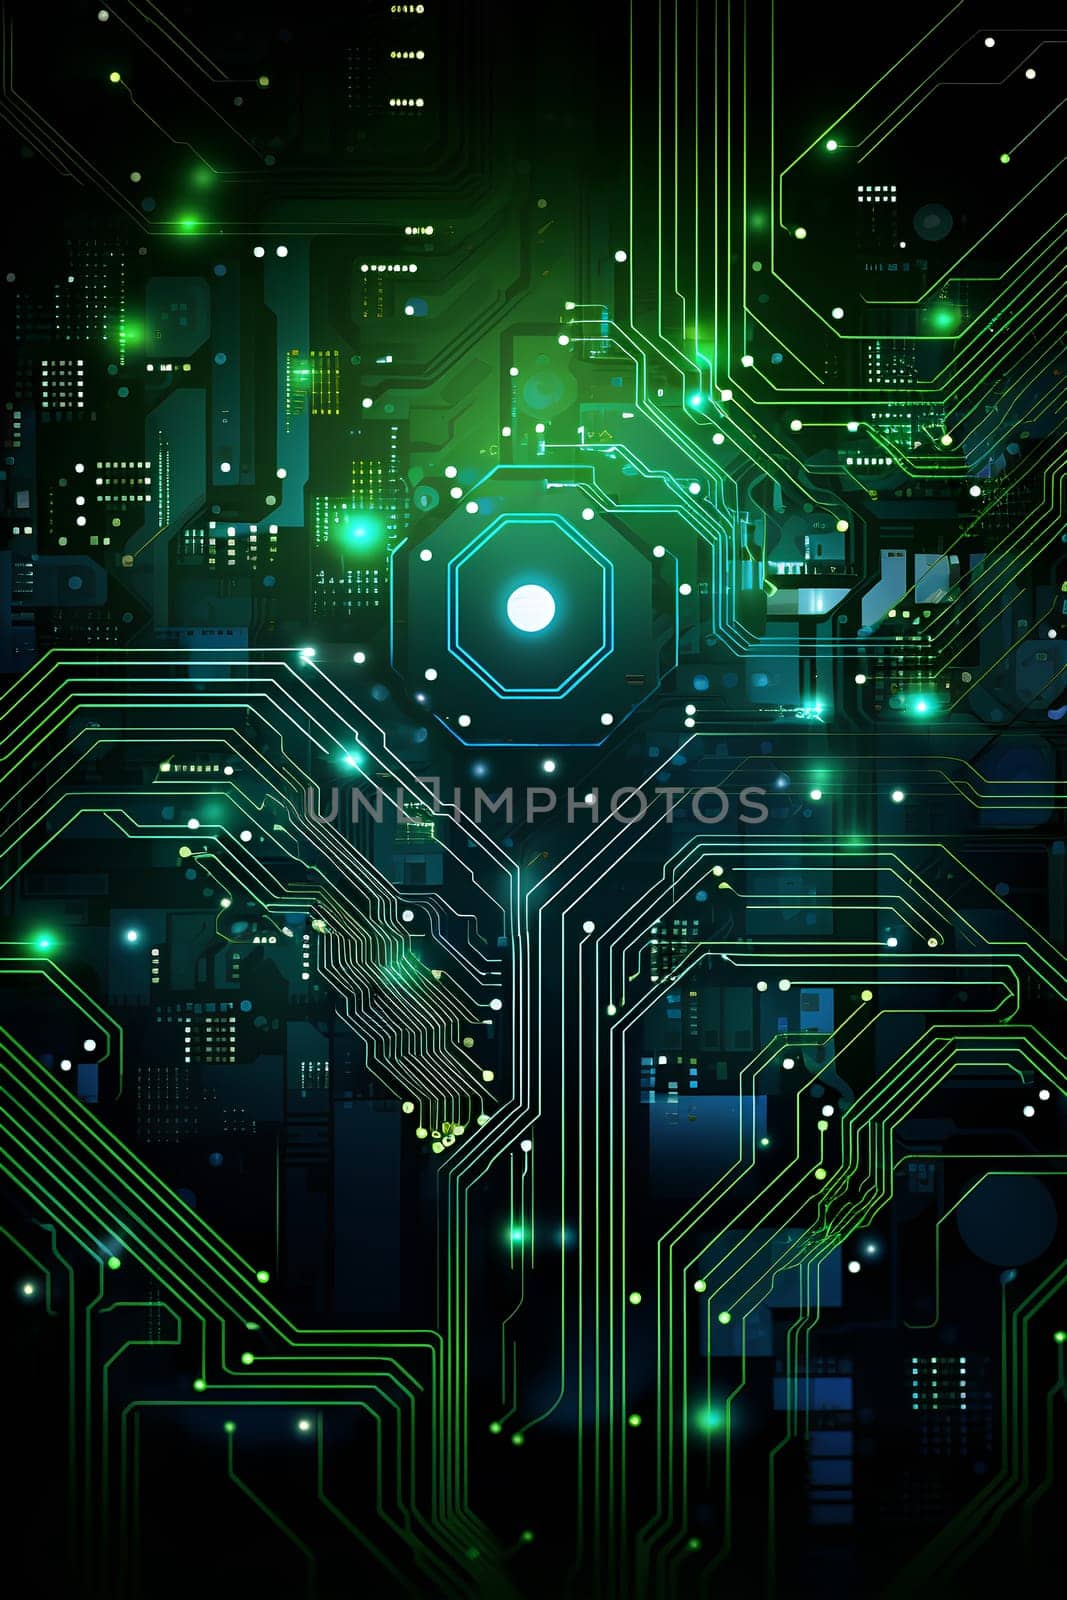 A computer circuit board with green lights by chrisroll